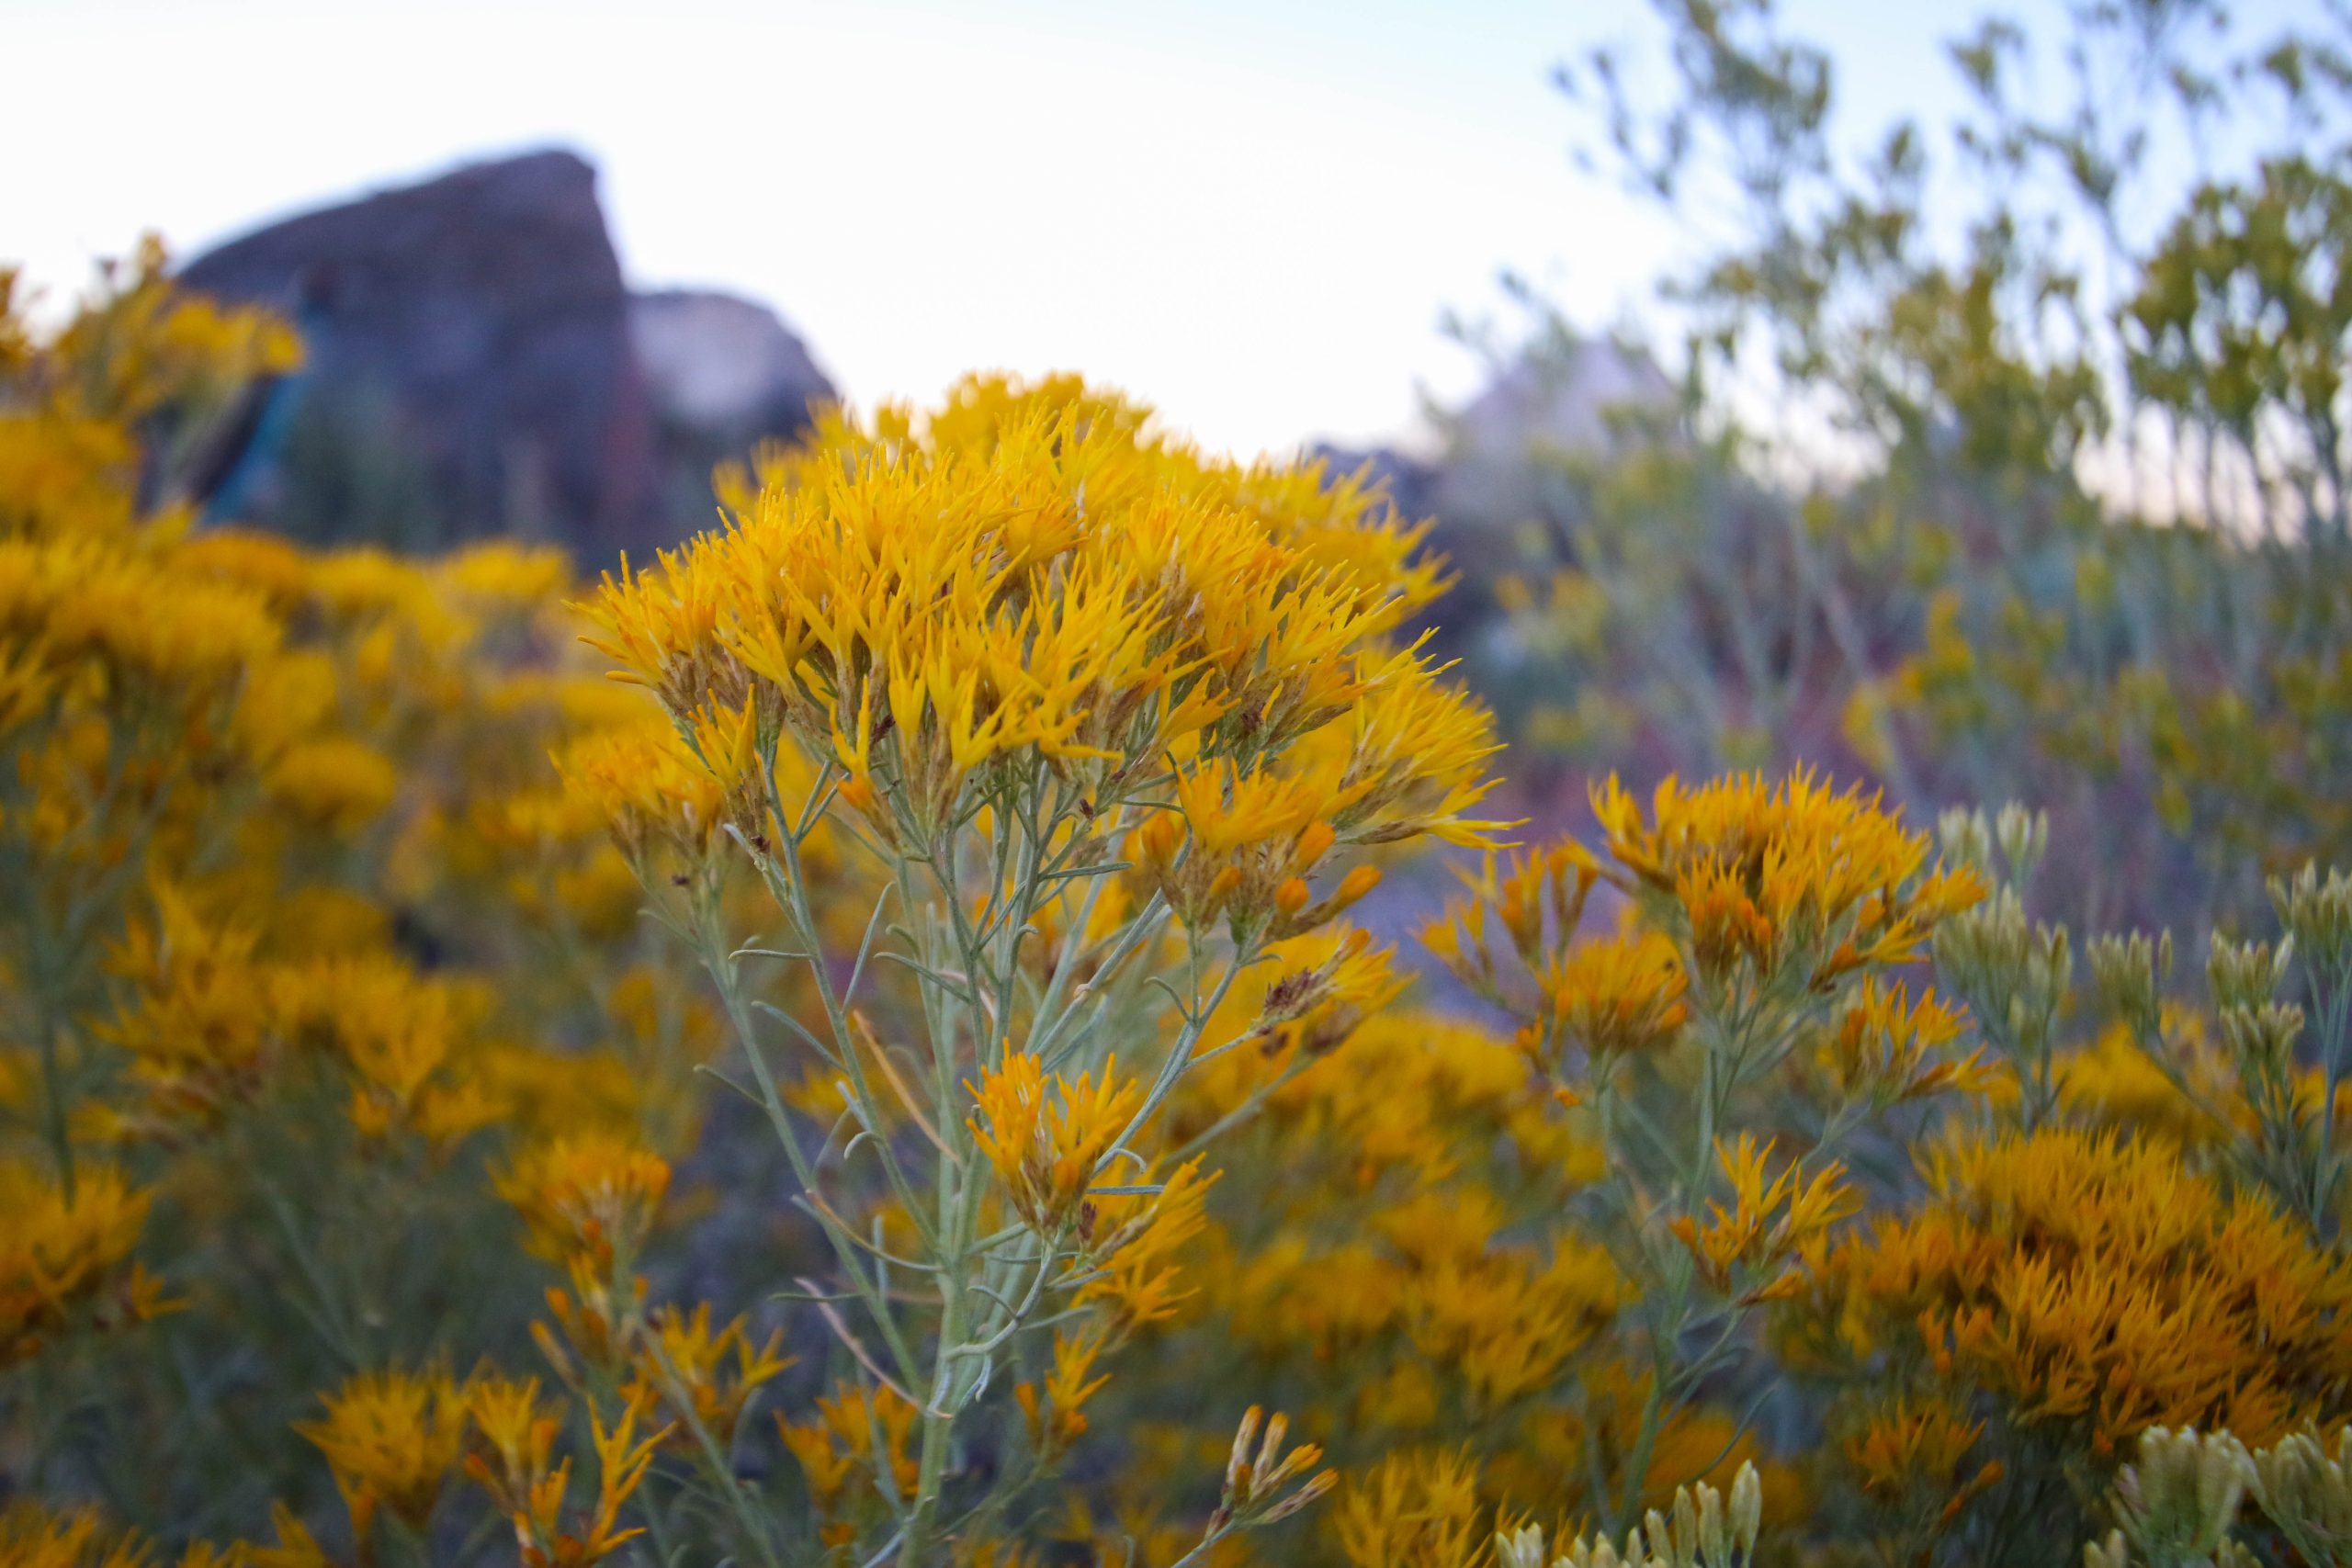 Rubber Rabbitbrush at the Site